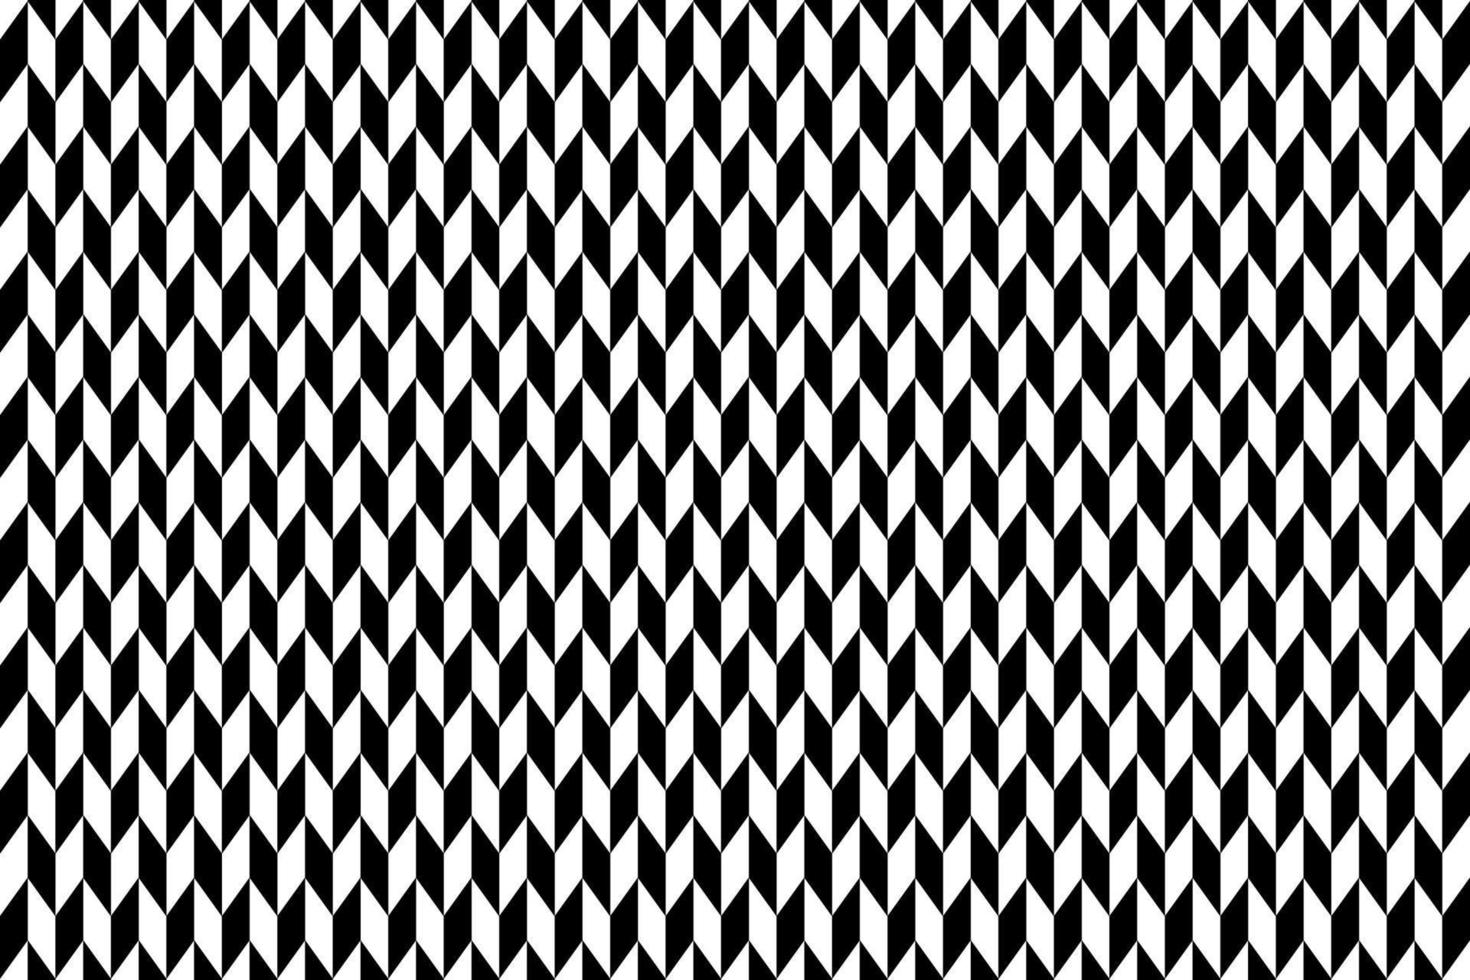 Chevron pattern in white and black. Vector illustration